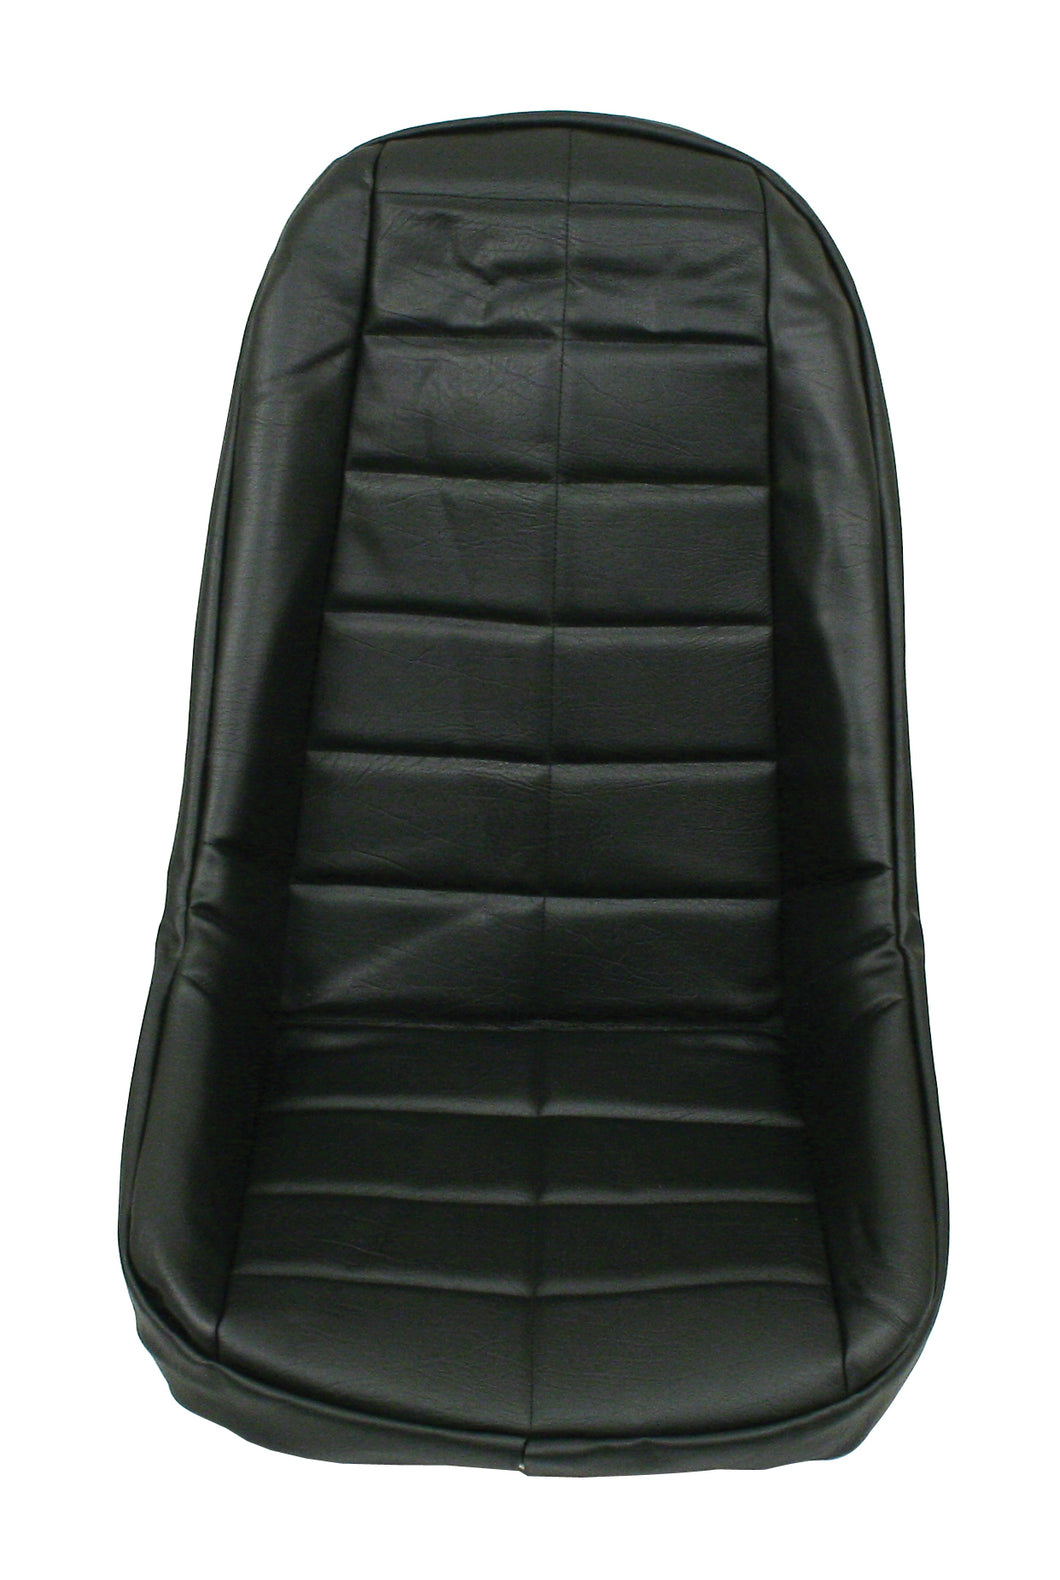 Empi Black Square Pattern Low Back Seat Cover - Each - 3882